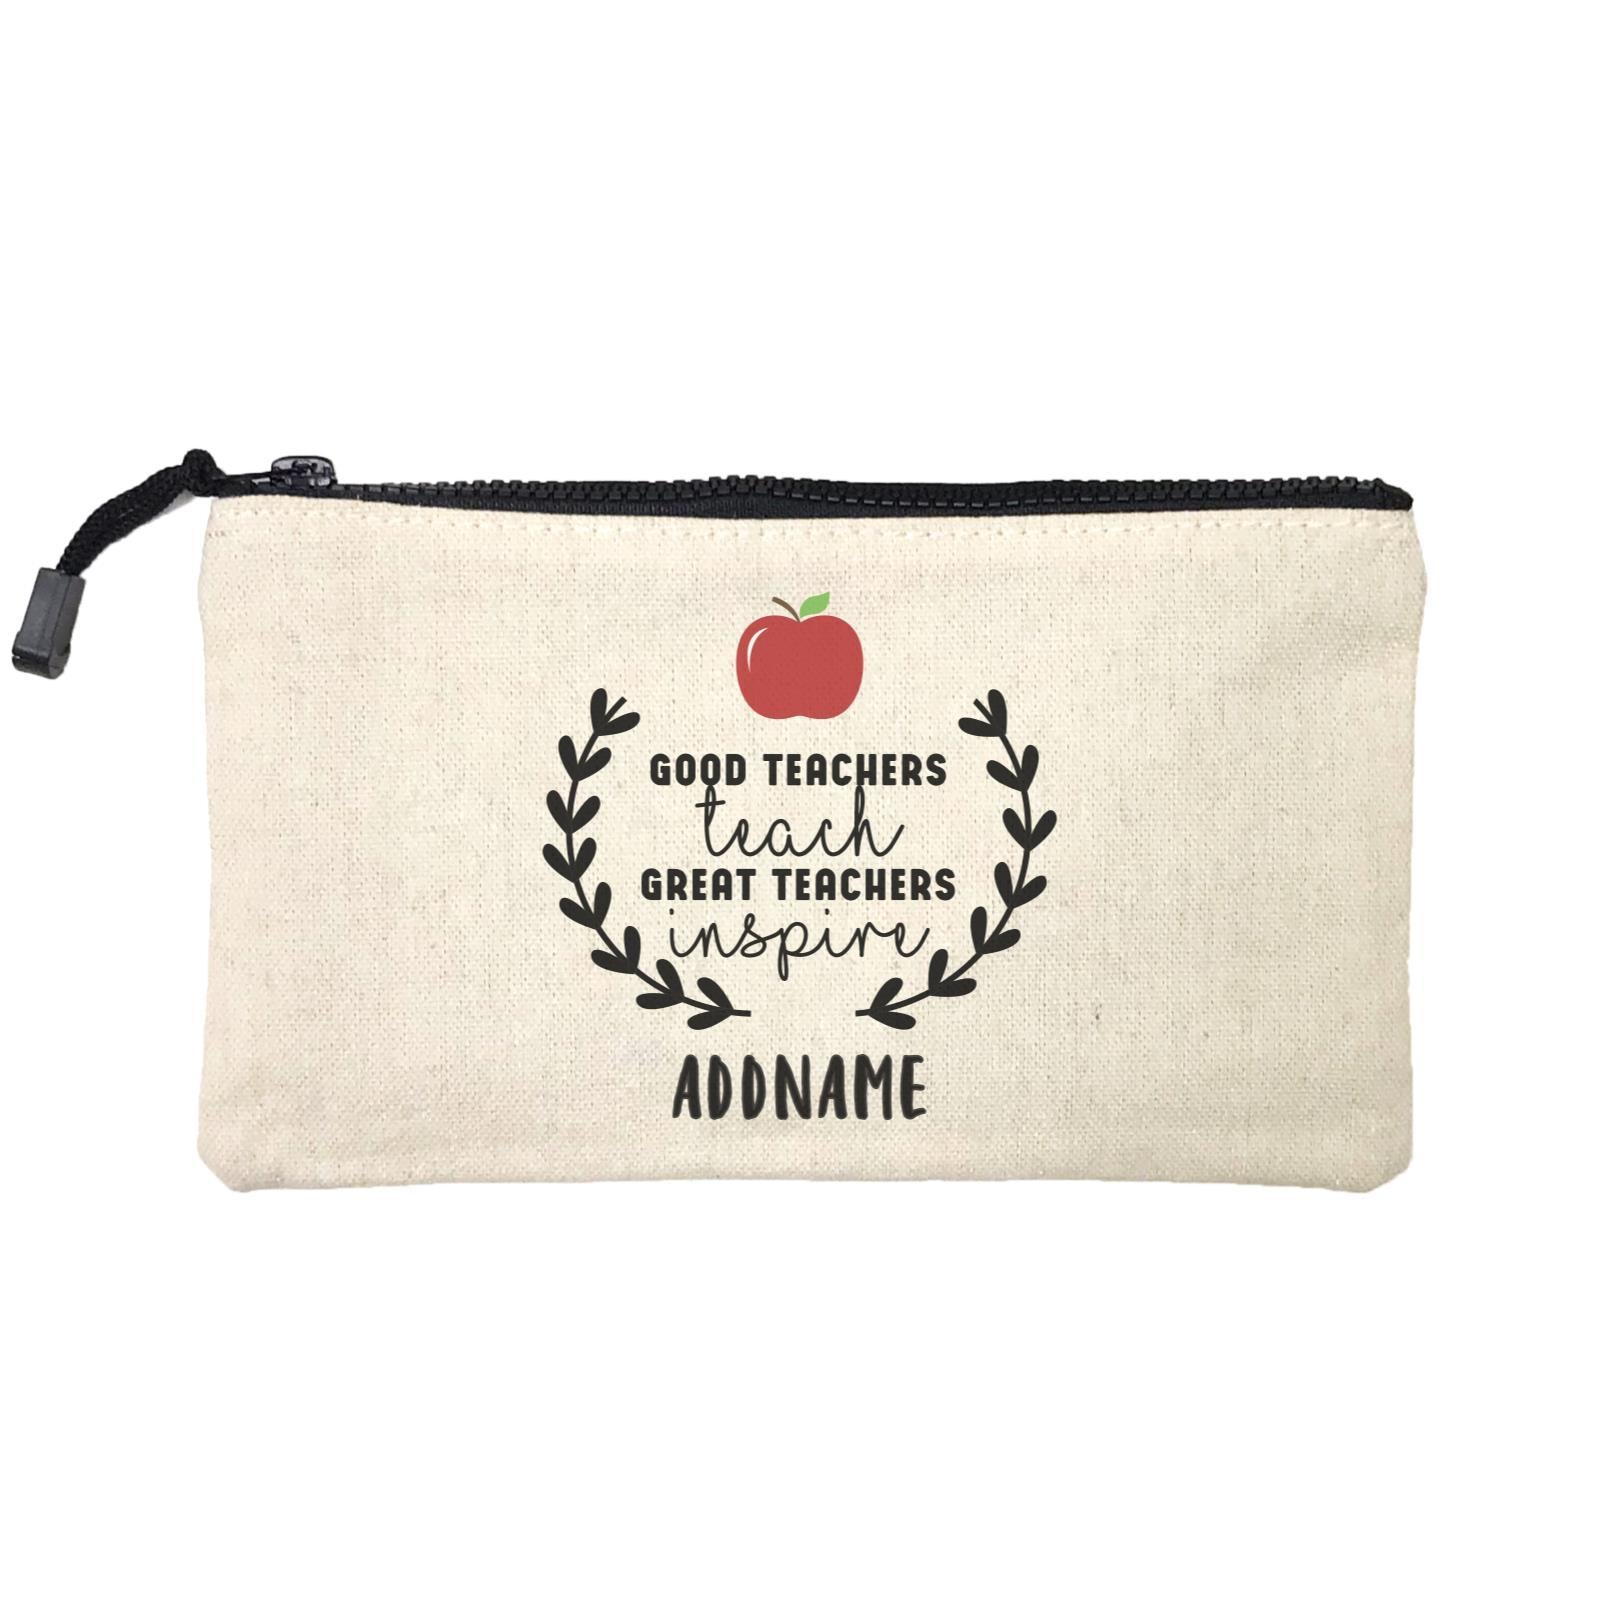 Great Teachers Good Teachers Teach Great Teachers Inspire Addname Mini Accessories Stationery Pouch